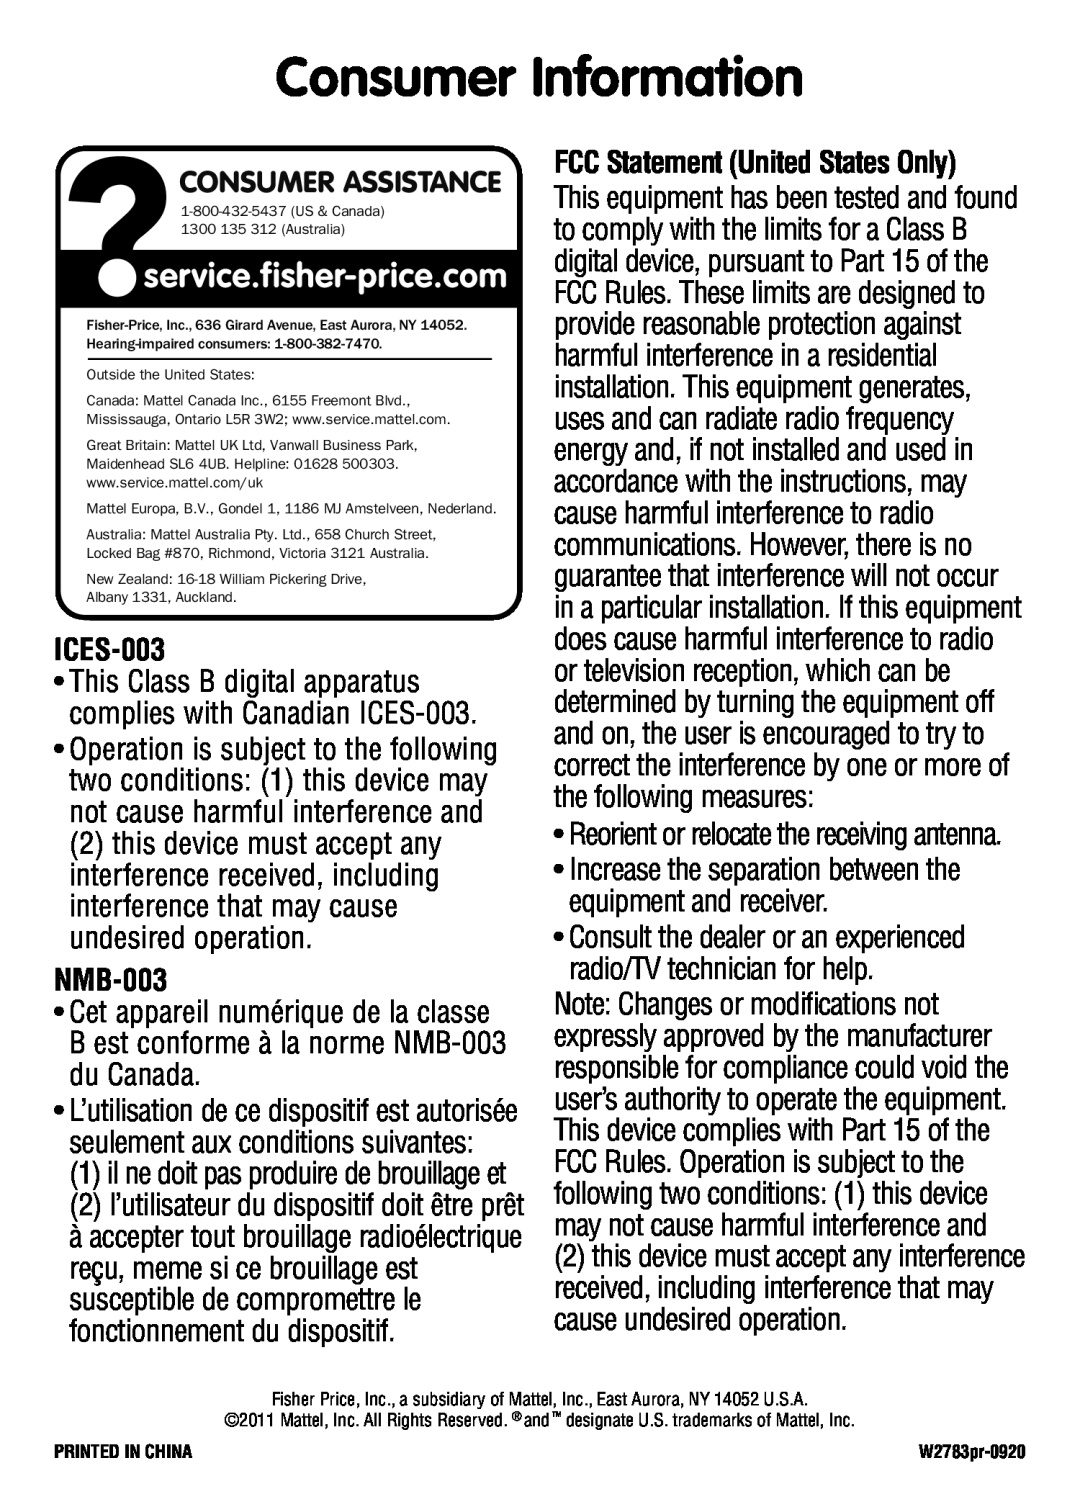 Fisher-Price W2783 Consumer Information, Consumer Assistance, ICES-003, NMB-003, FCC Statement United States Only 